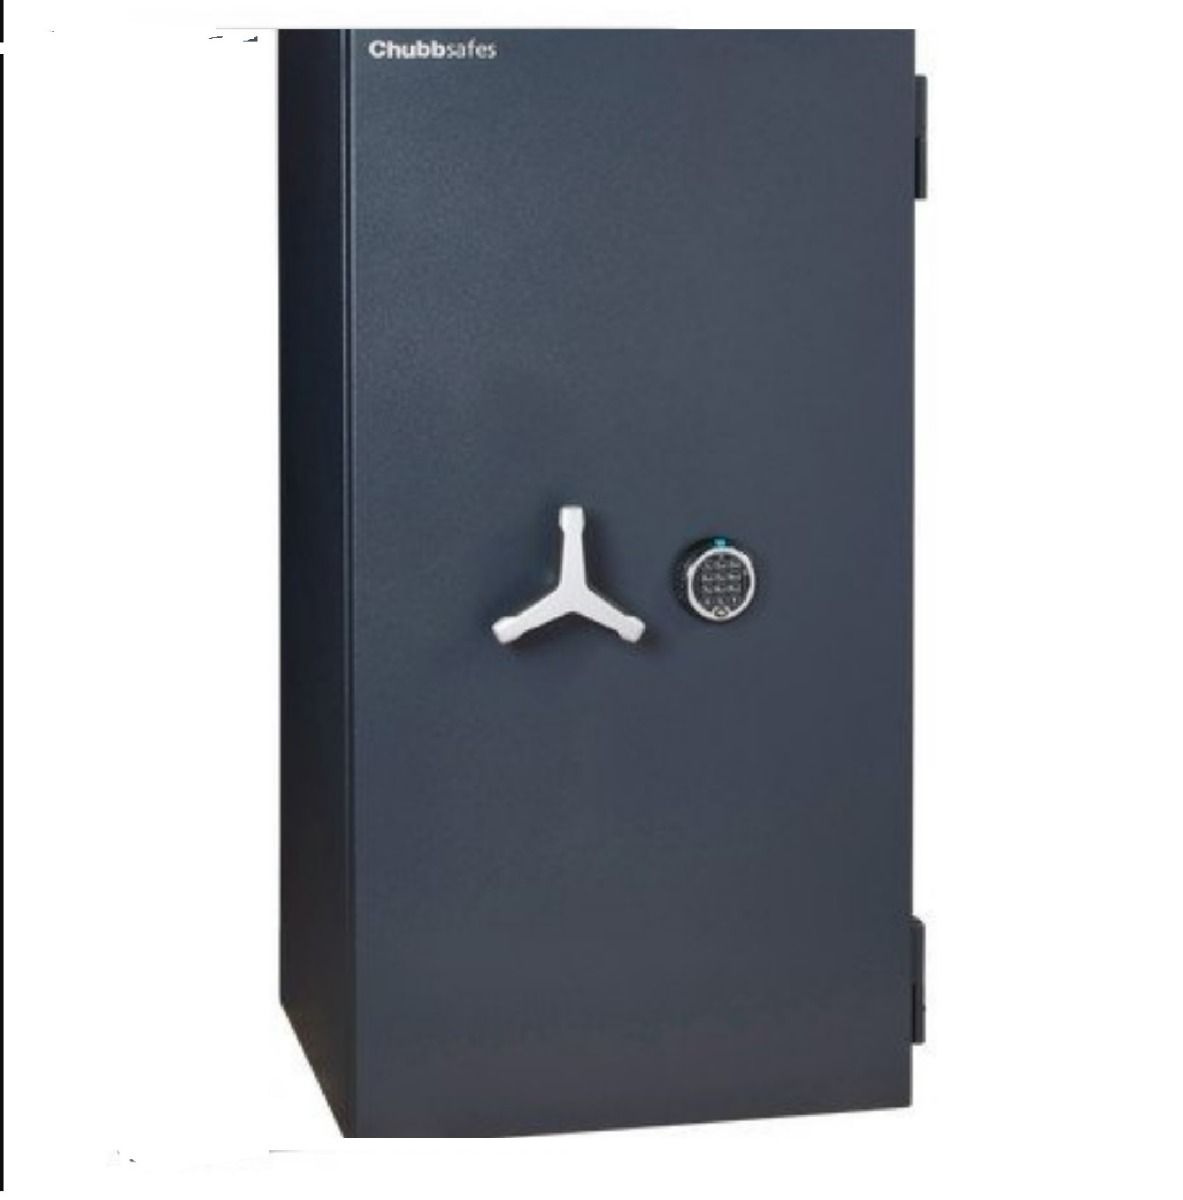 Chubbsafes - DUOGUARD Grade I Model 300 Certified Burglary and Fire Resistance Safe - EL